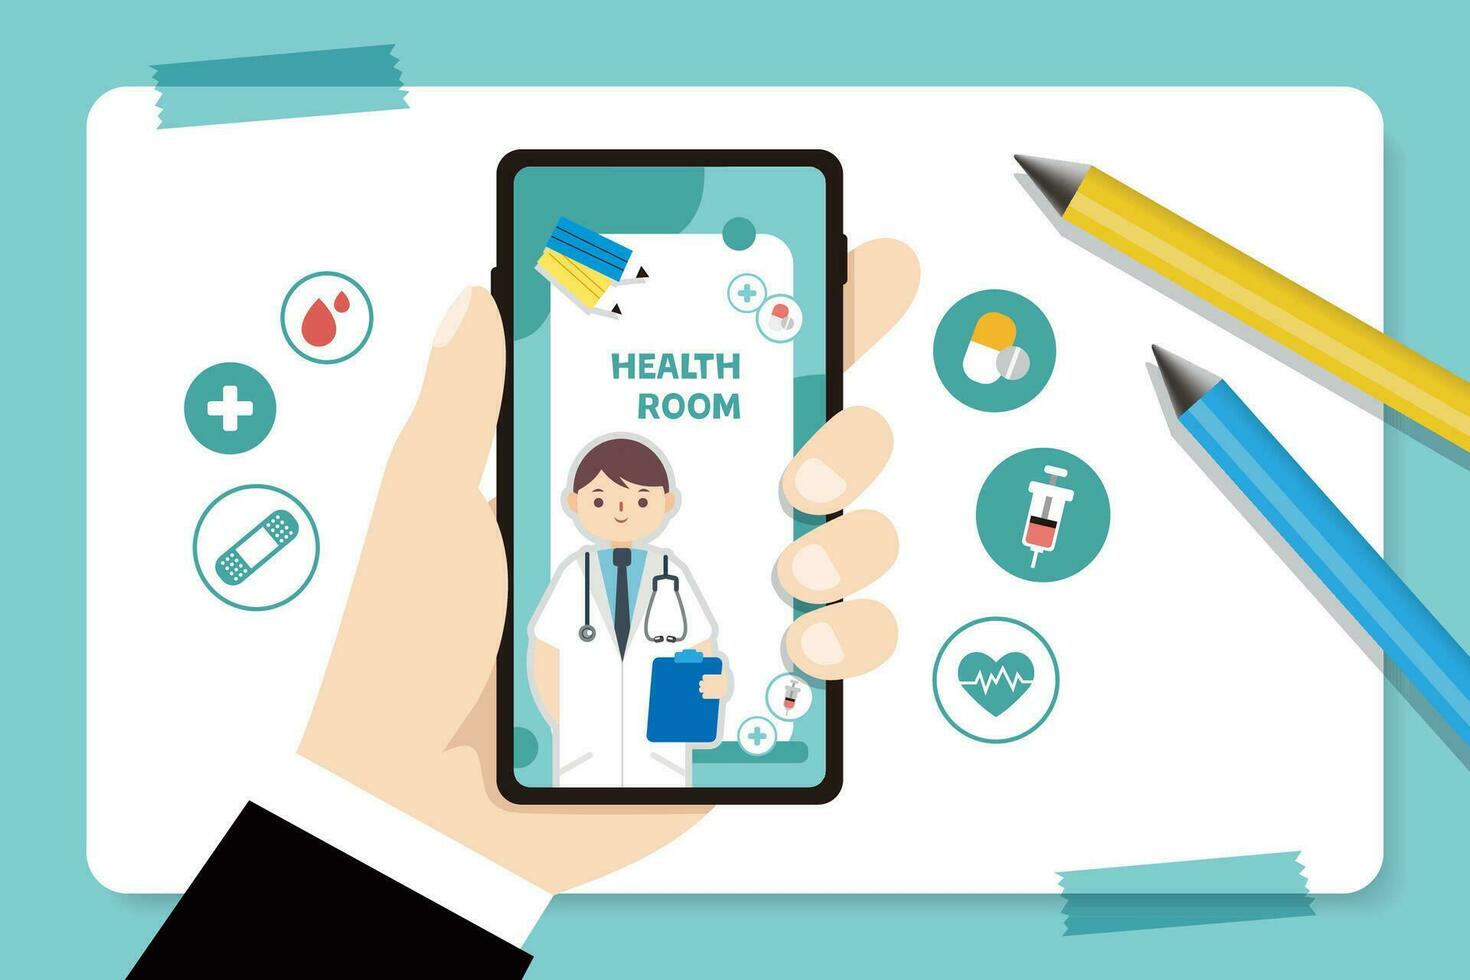 Hand holding a mobile phone the screen shows the doctor's knowledge teaching. Healthcare vector concept. hospital staff care illustration